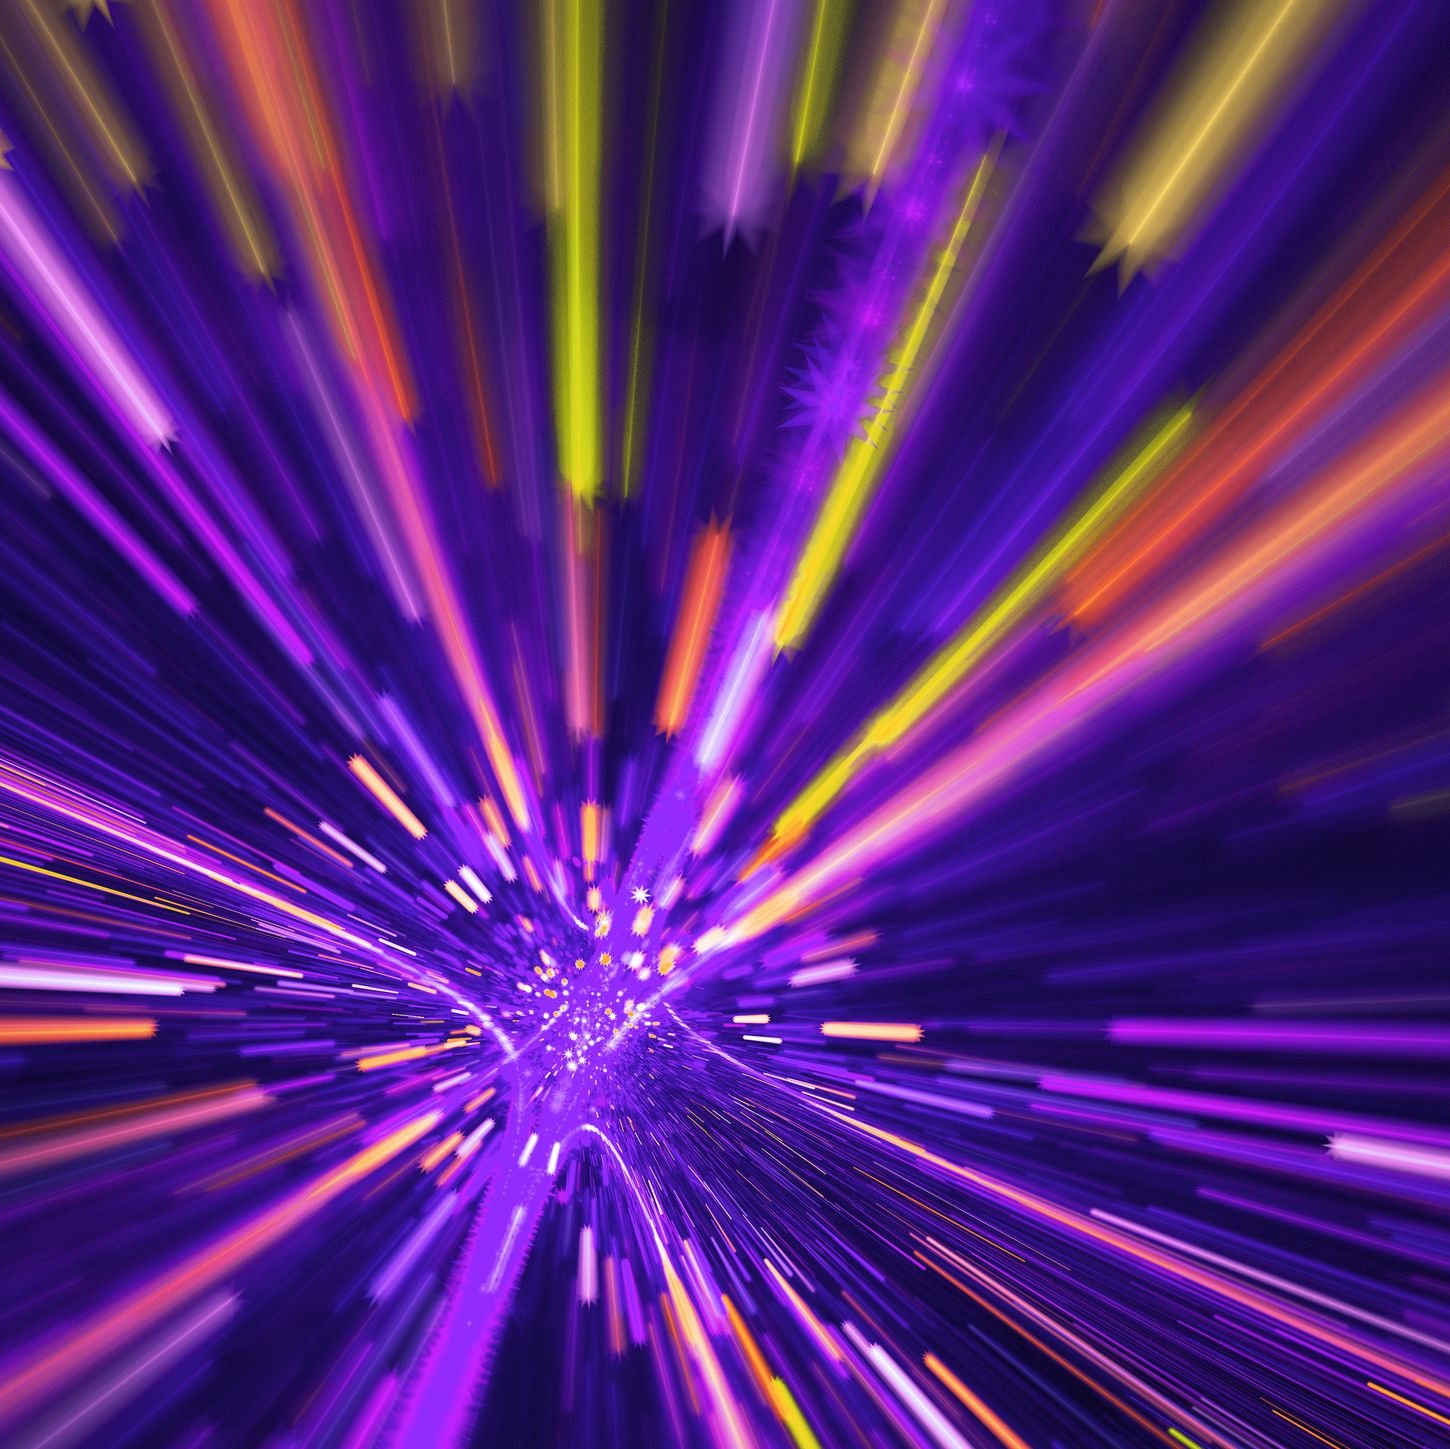 Scientists Announce a Physical Warp Drive Is Now Possible. Seriously.